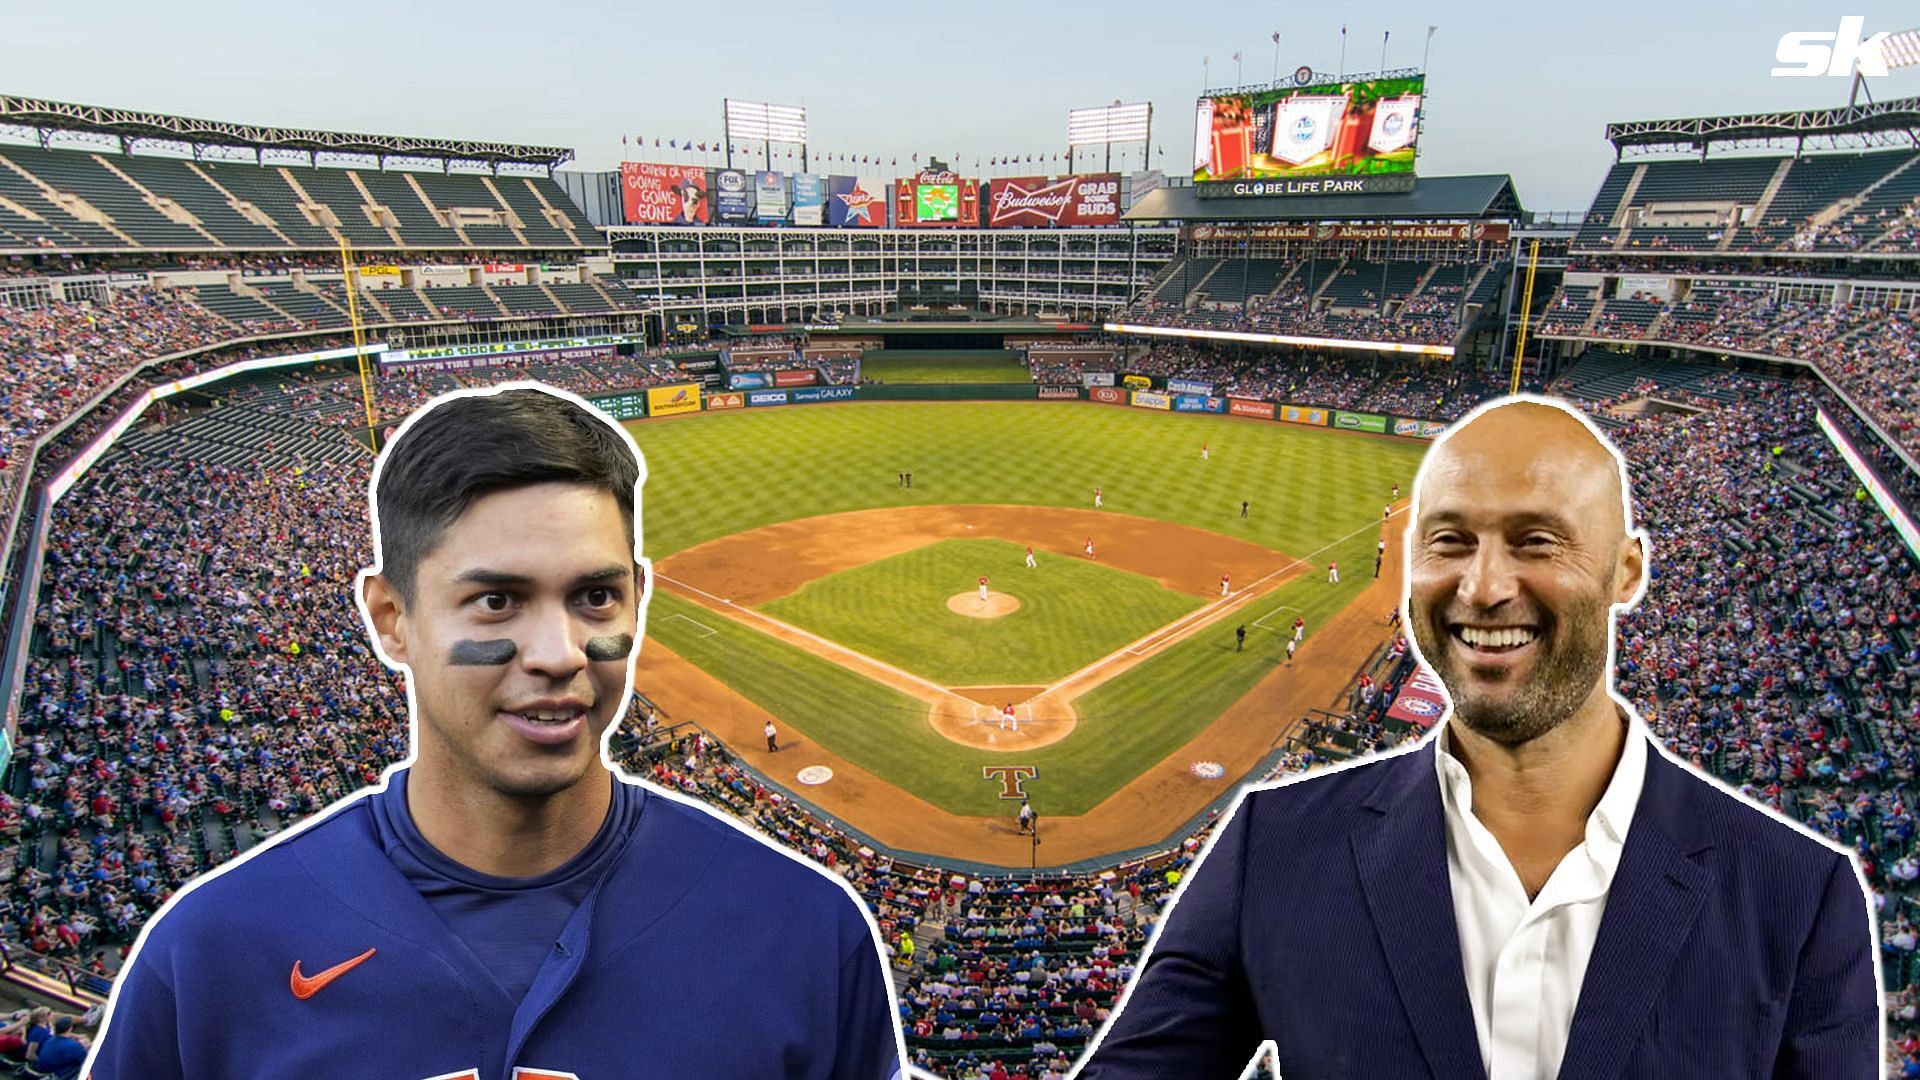 Astros' Mauricio Dubon admits Derek Jeter is his hero in wholesome exchange  with Yankees icon: You're the reason I love this game